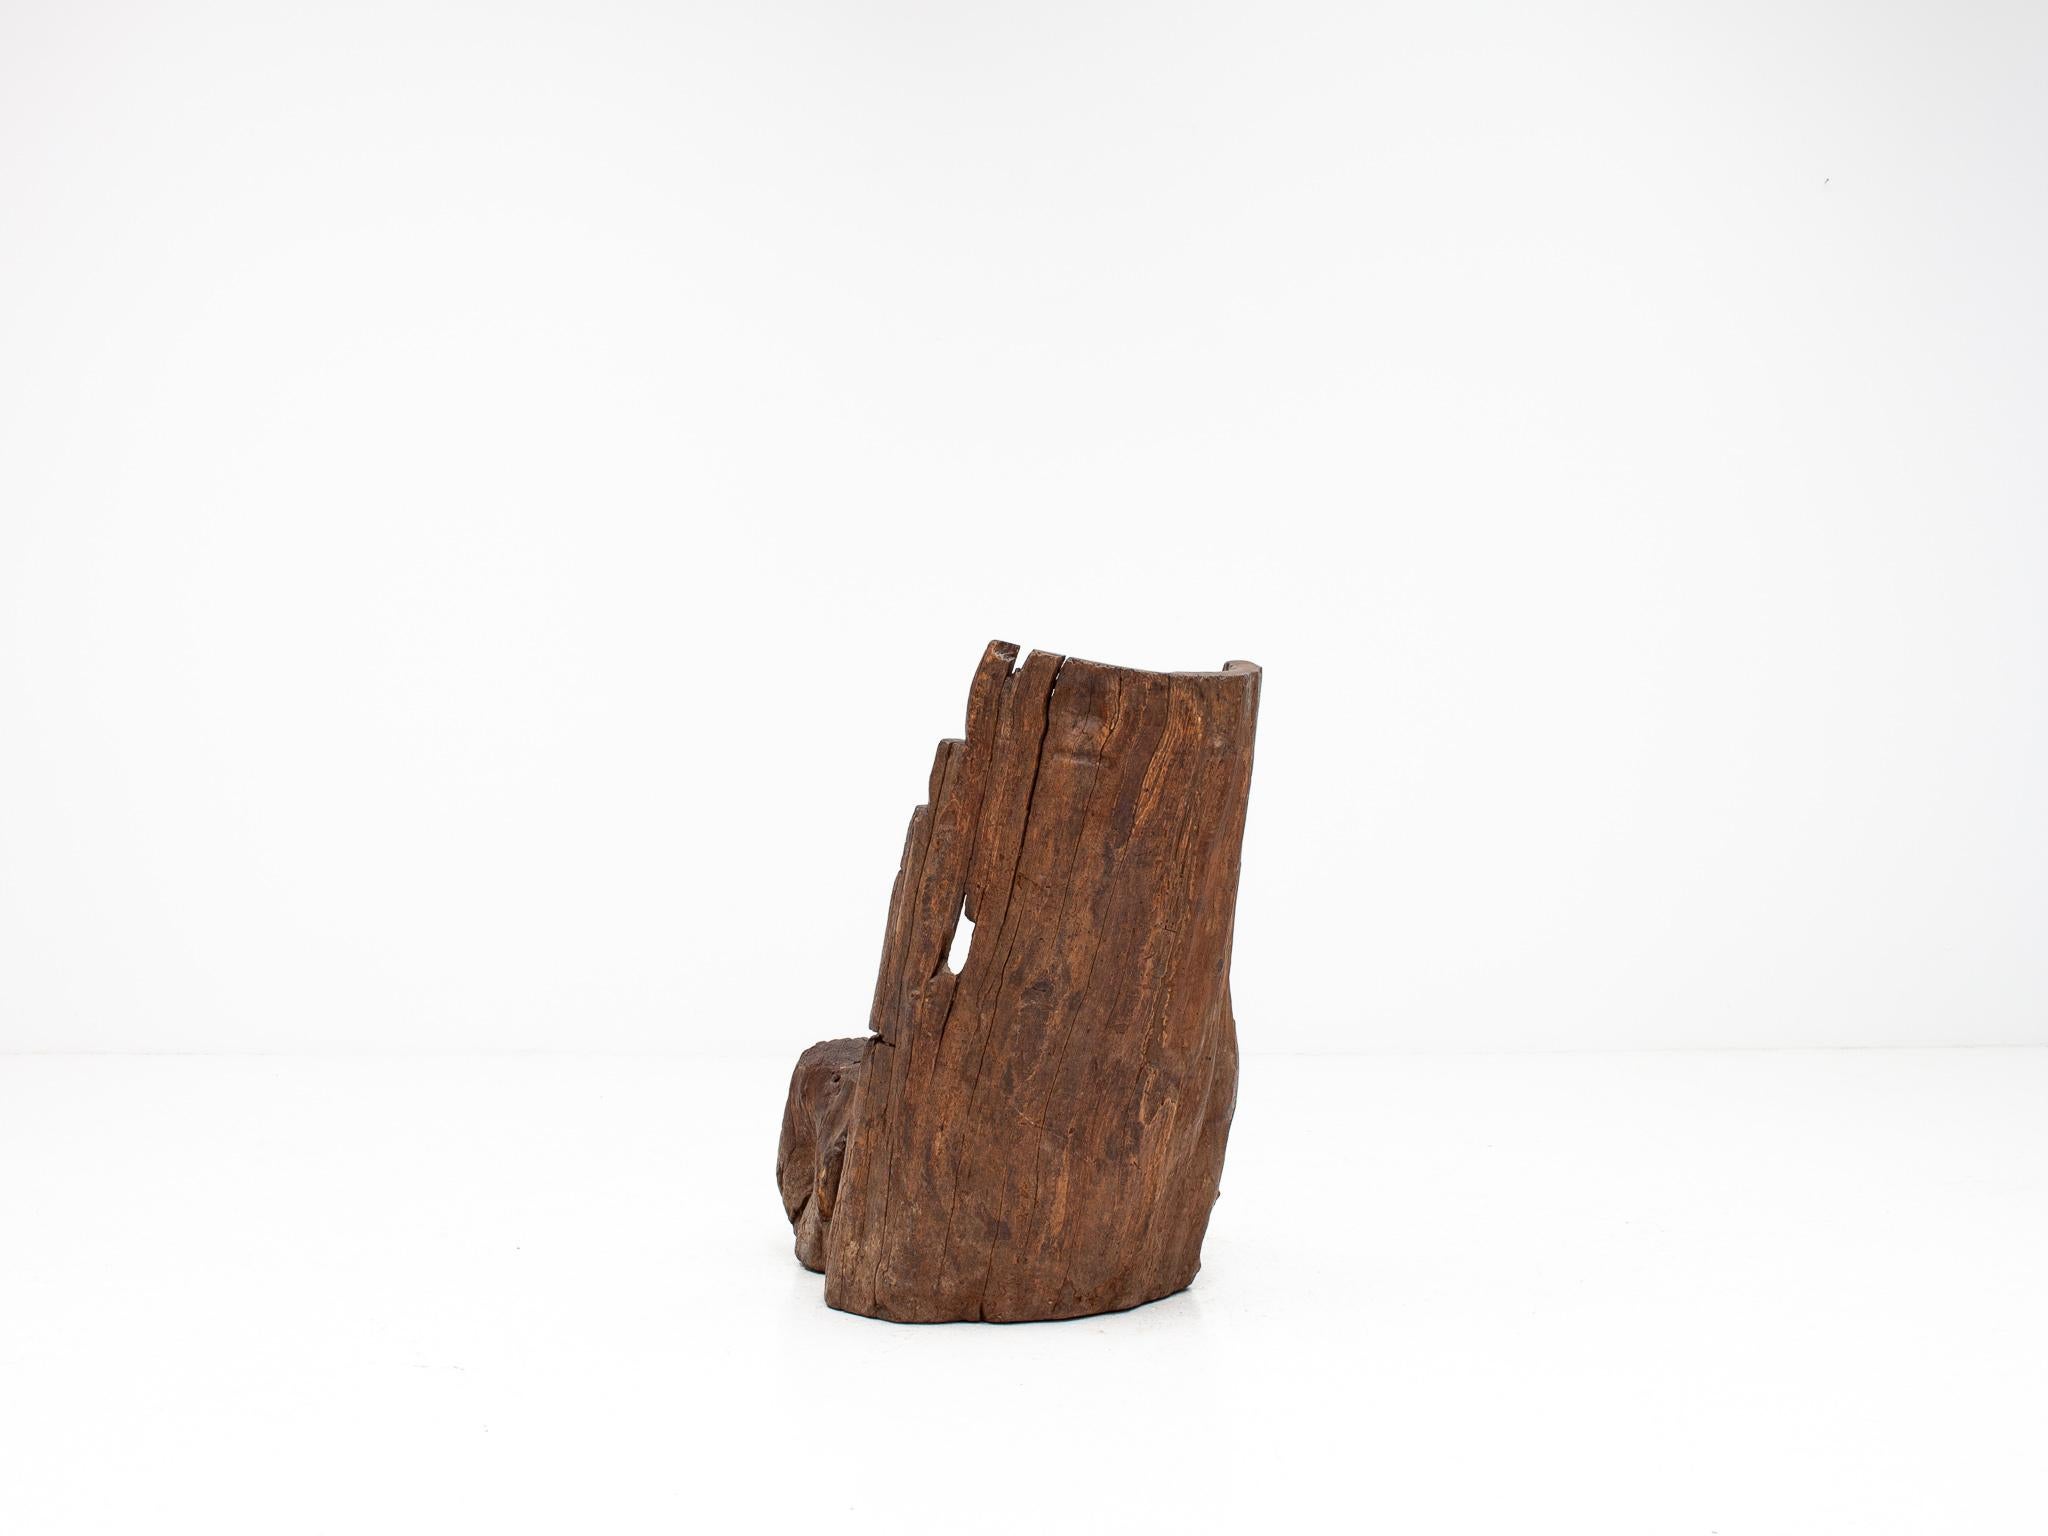 Wood A Dug-out Carved Rustic Primitive Tree Trunk Fireside Chair Formed of Elm, c1800 For Sale